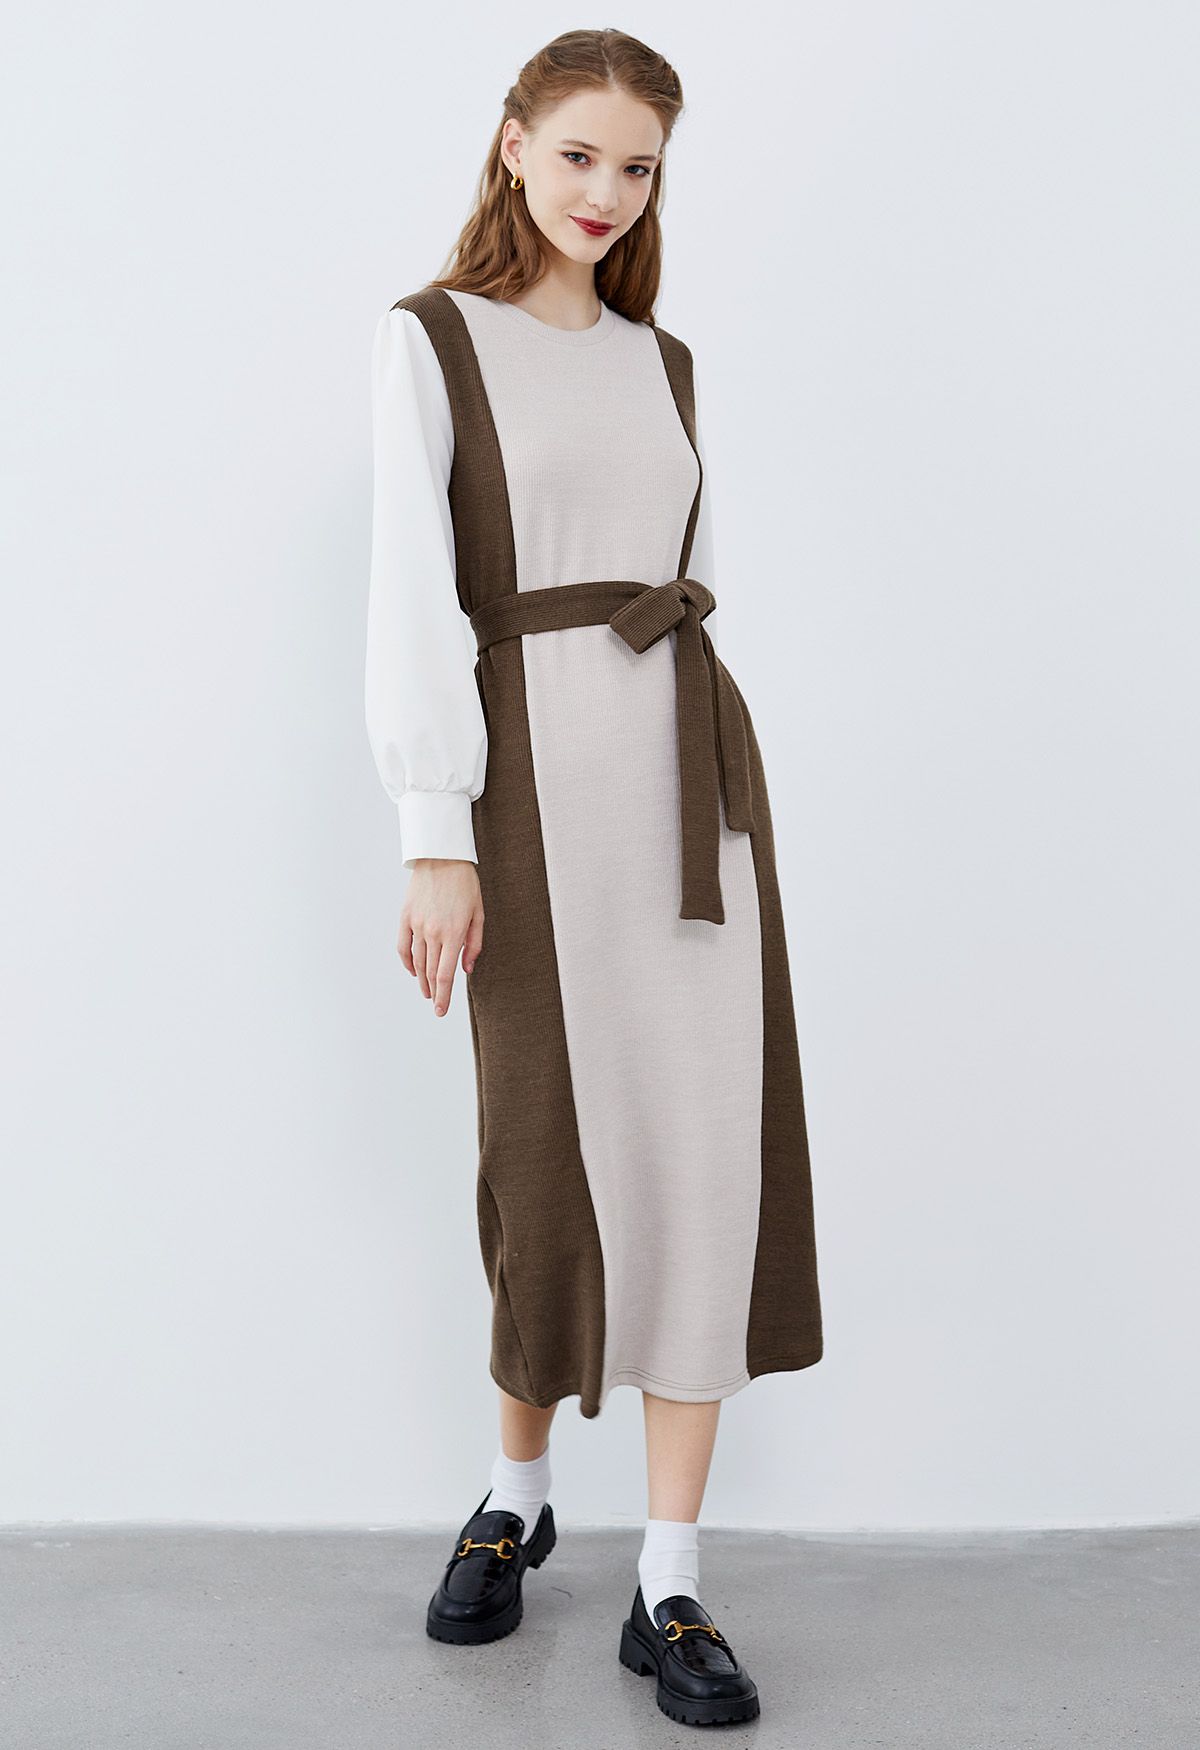 Spliced Sleeves Contrast Knit Dress in Brown - Retro, Indie and